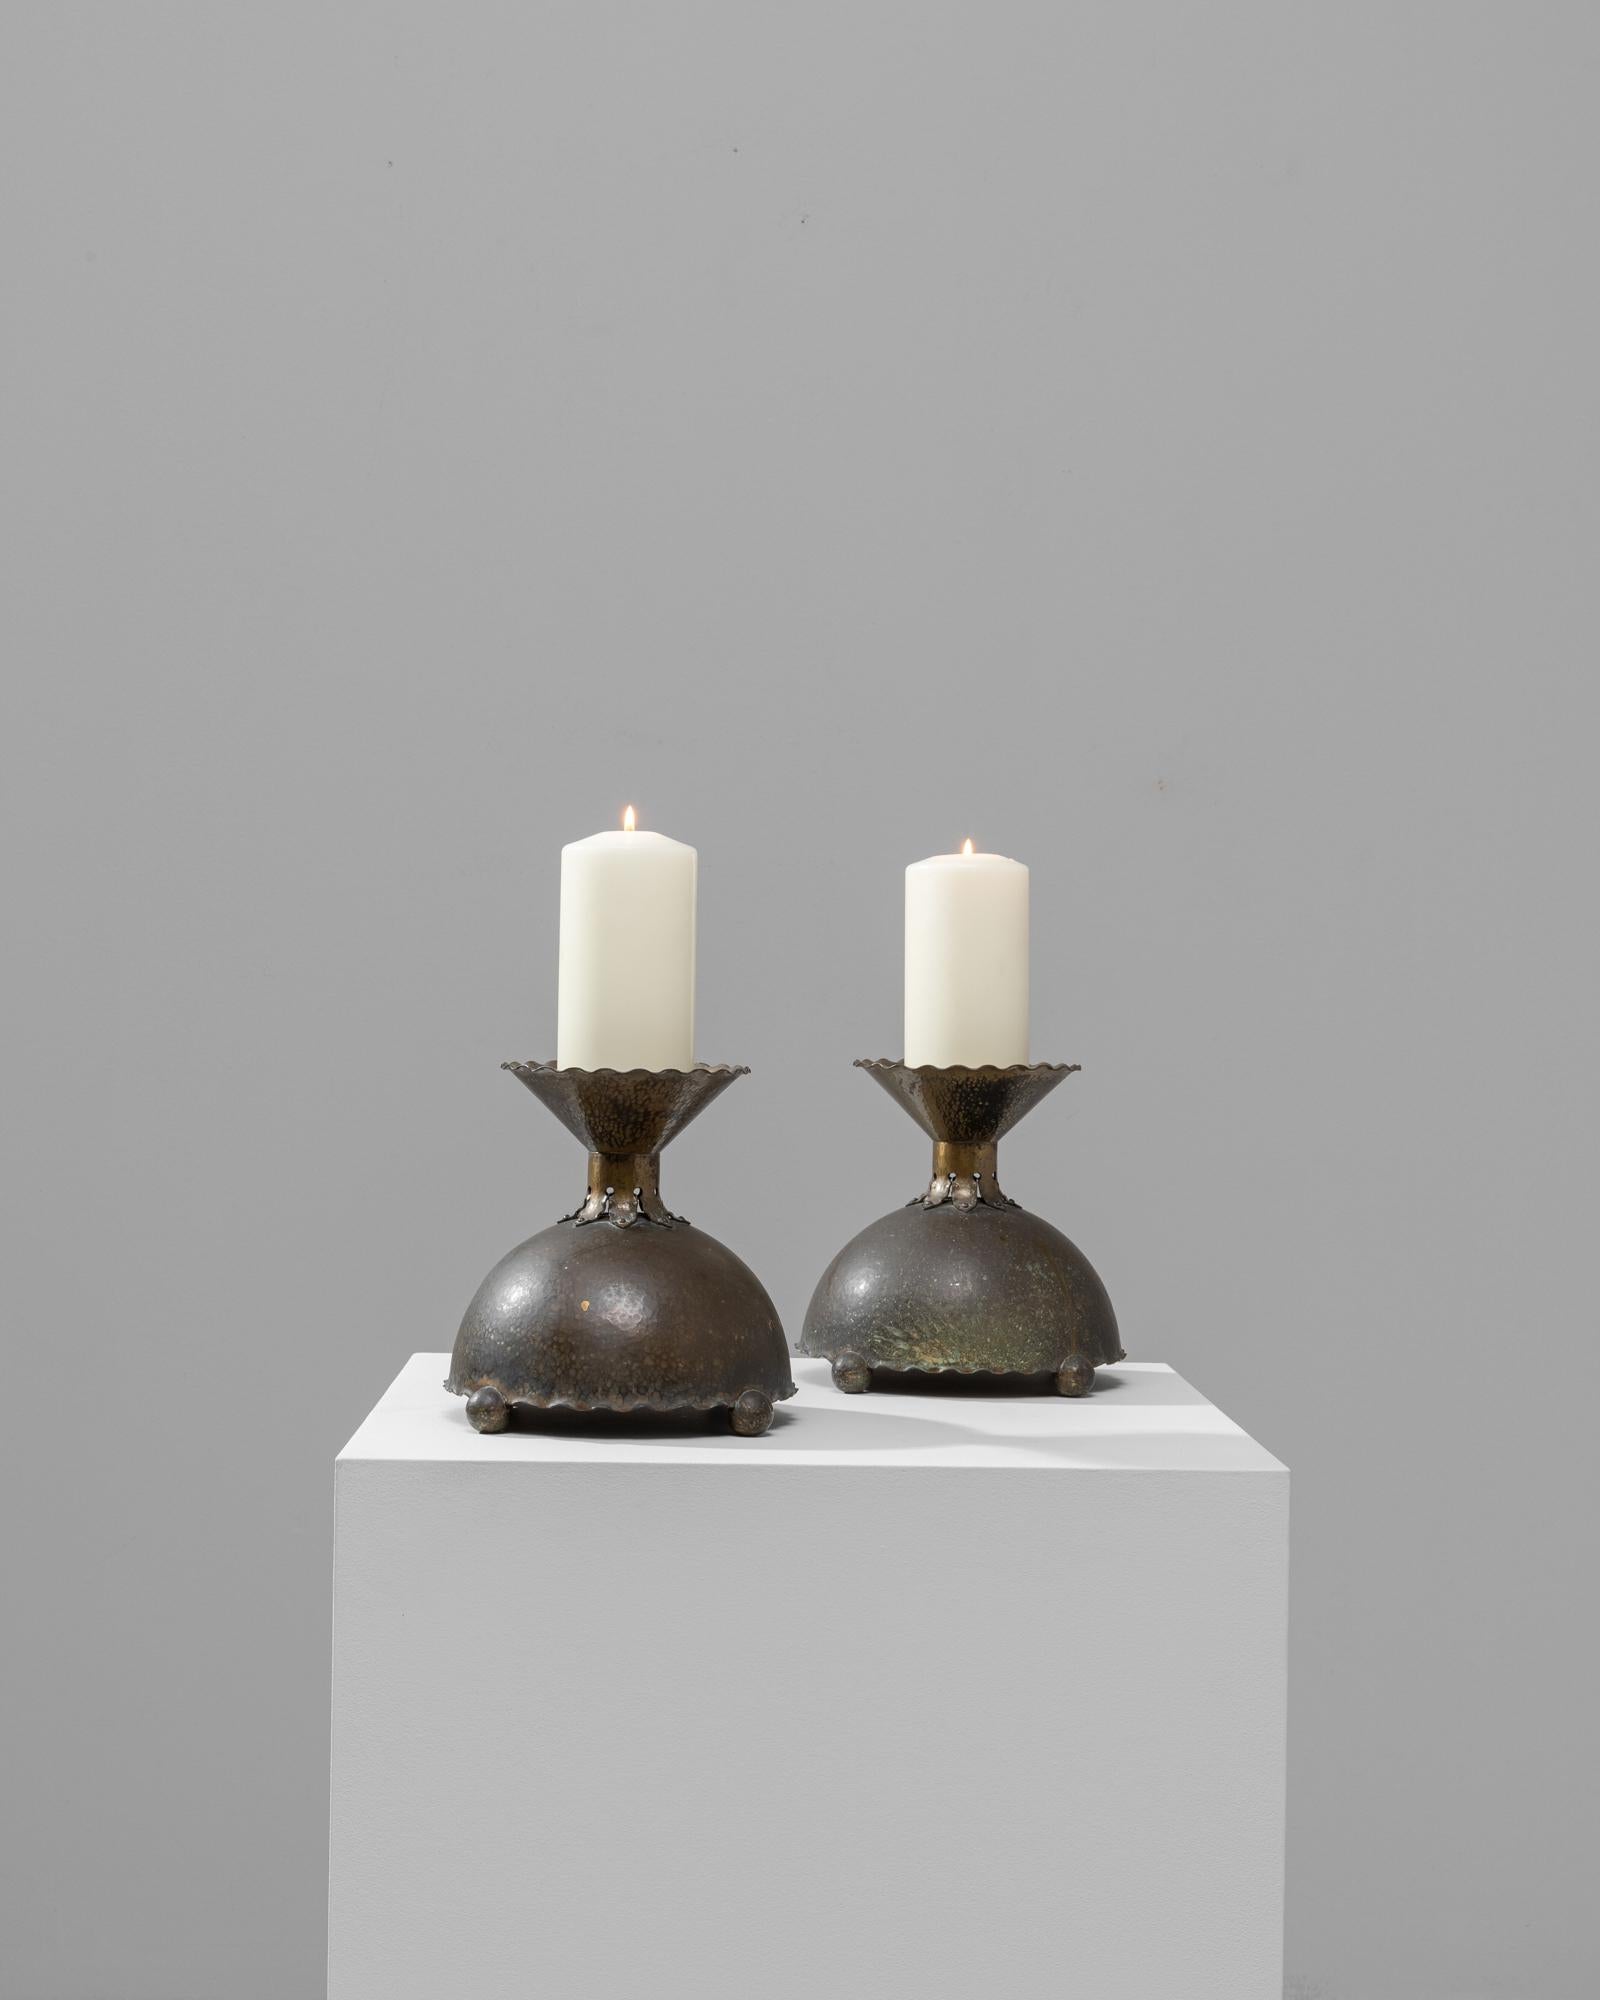 Add a touch of antique elegance to your home with this pair of early 20th-century French copper candlesticks. These distinctive pieces showcase the superb craftsmanship of the era, featuring a robust, spherical base with a beautifully patinated